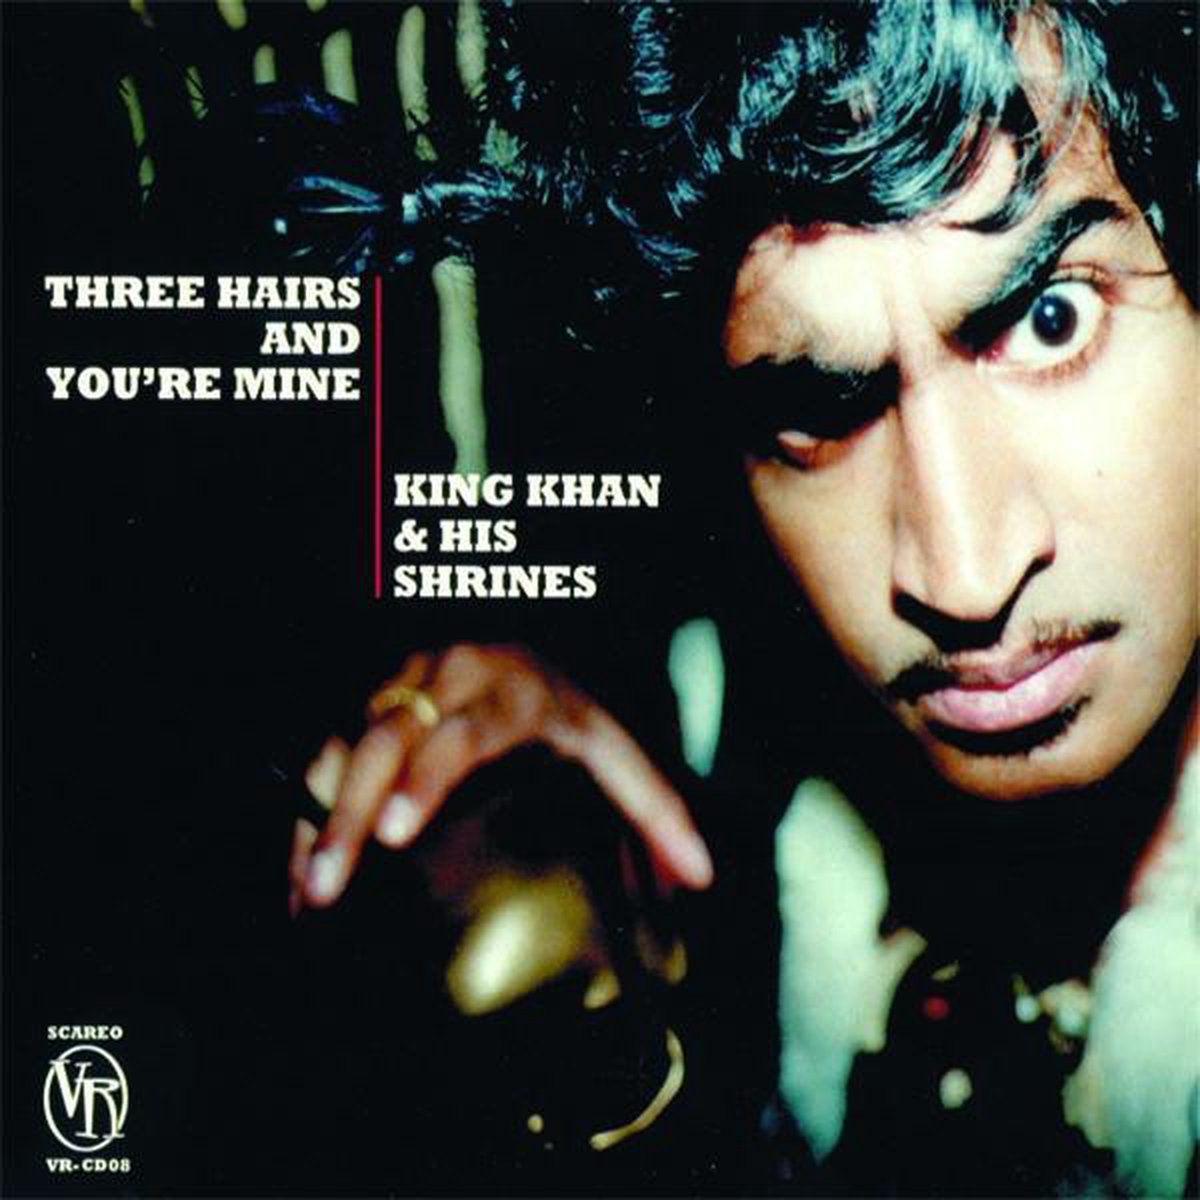 Three Hairs And You'Re Mine - King Khan & His Shrines